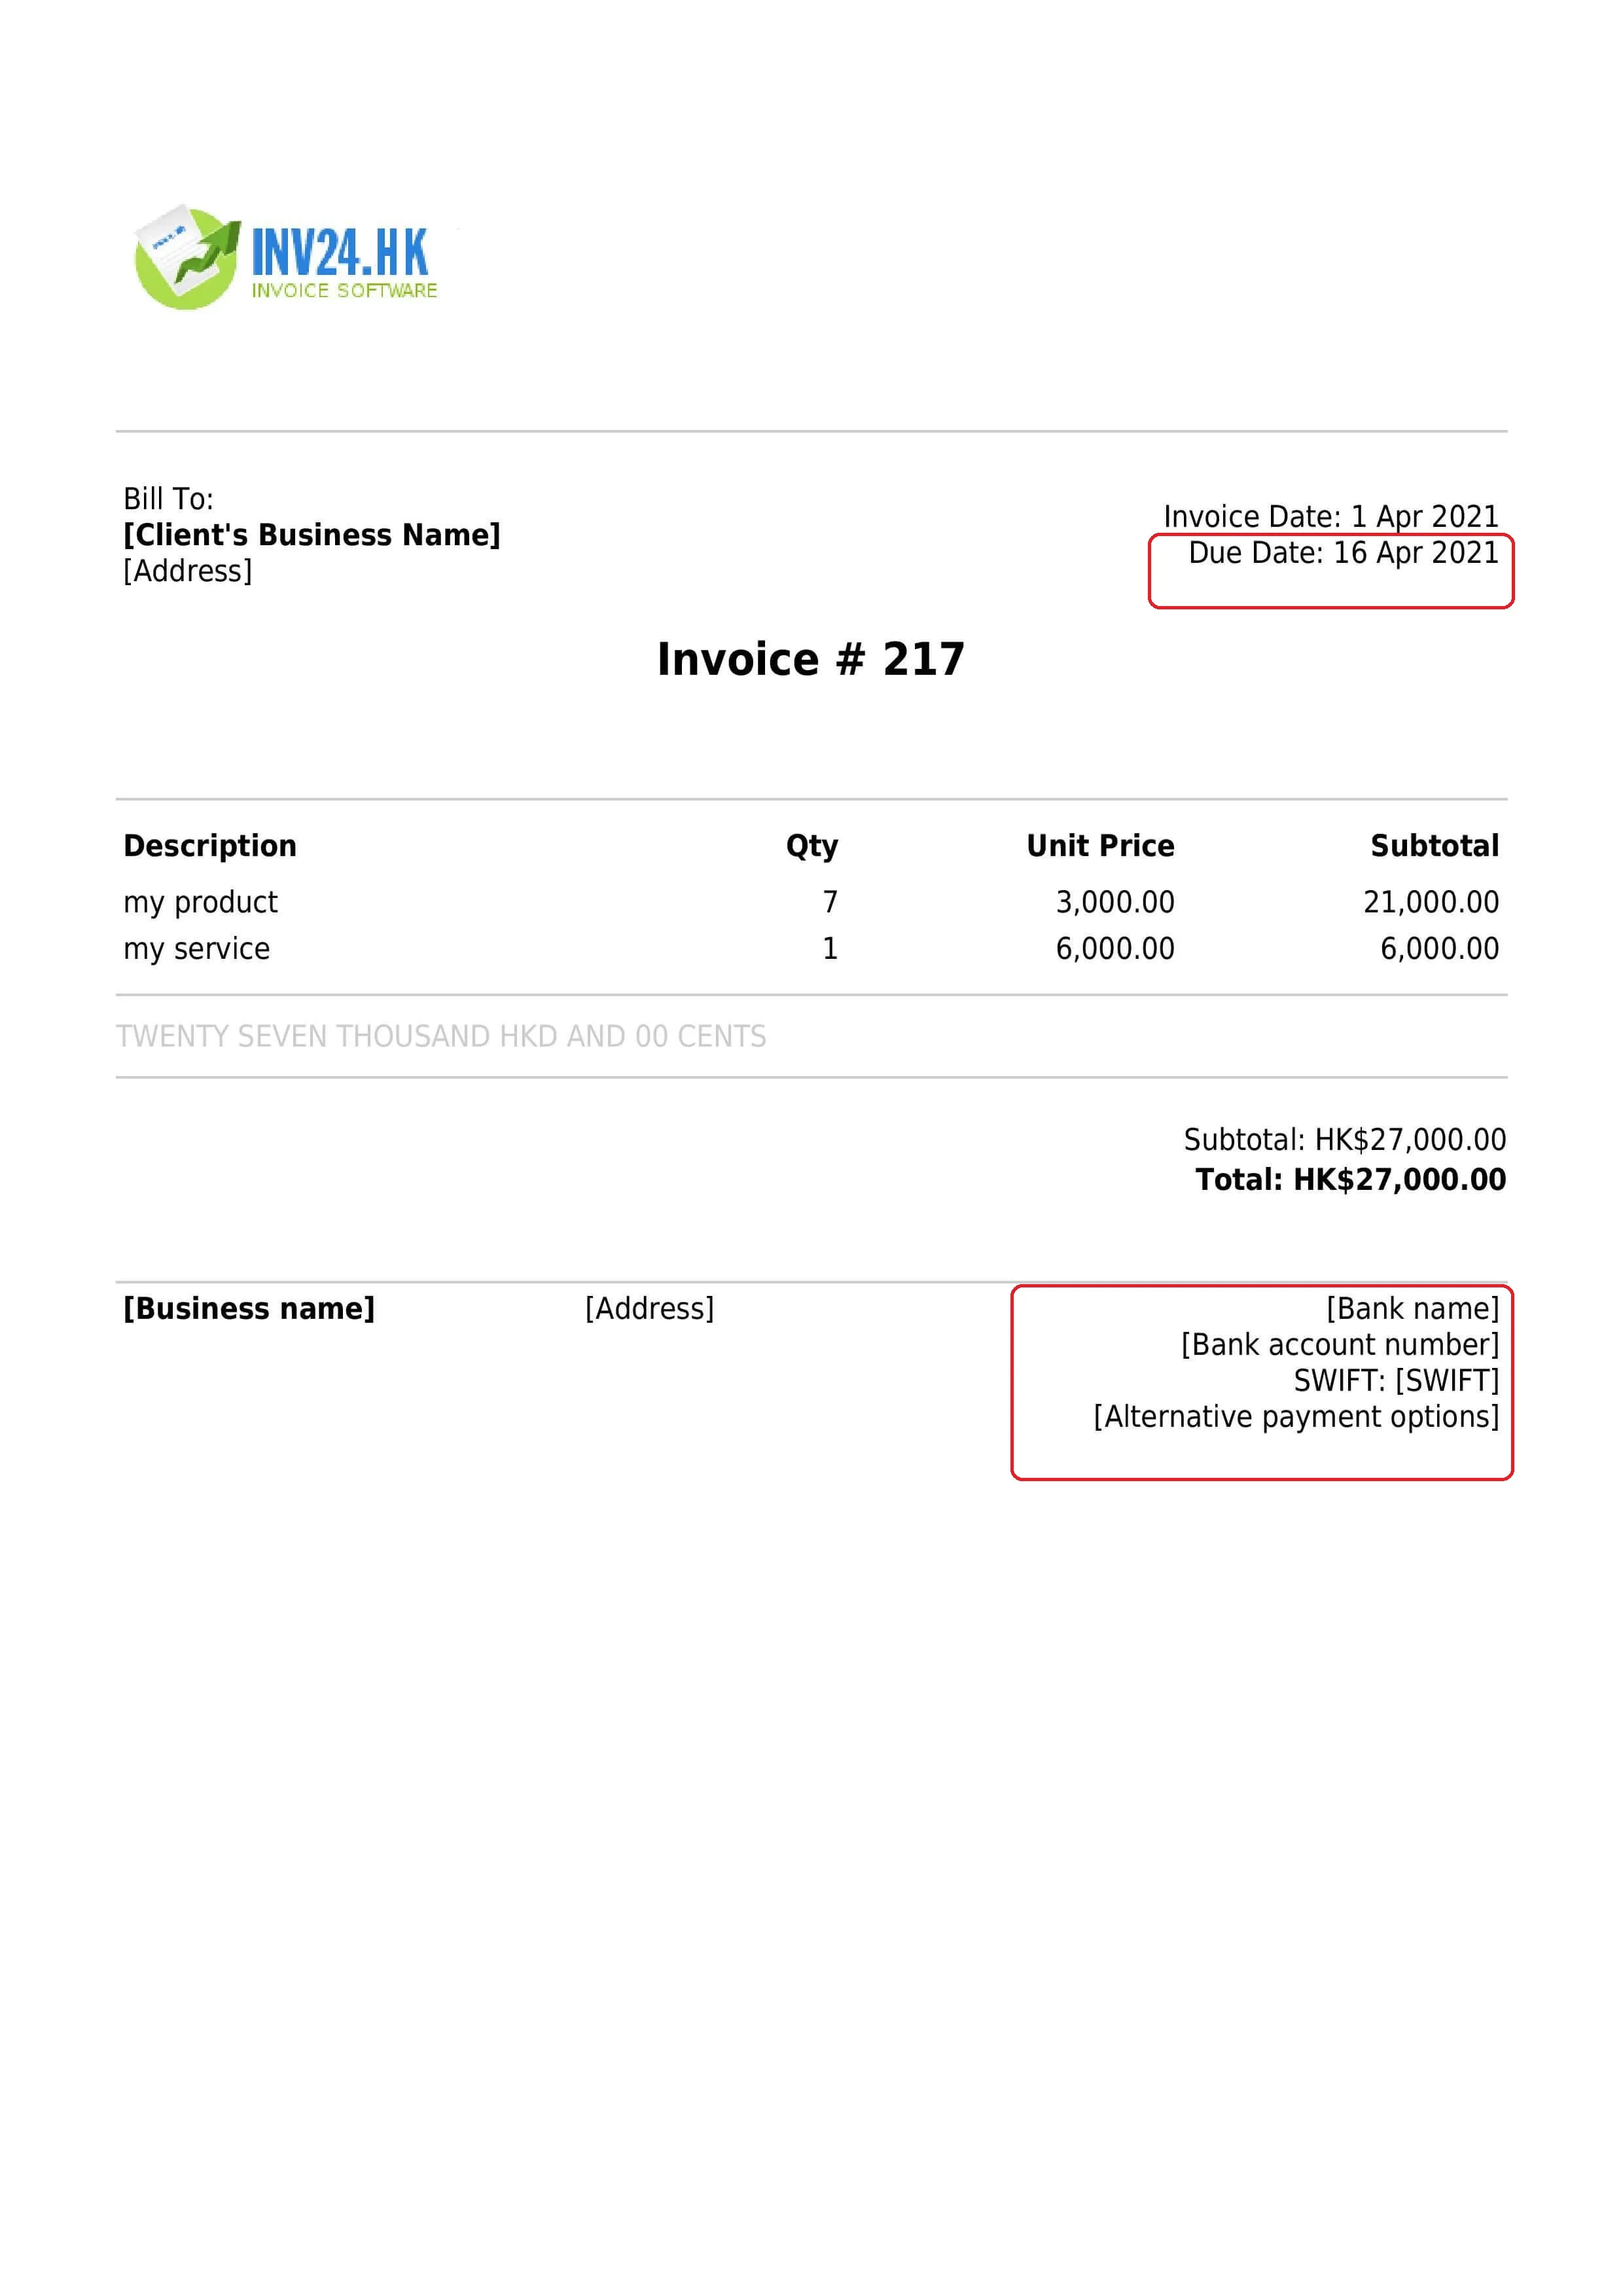 invoice payment terms / payment details